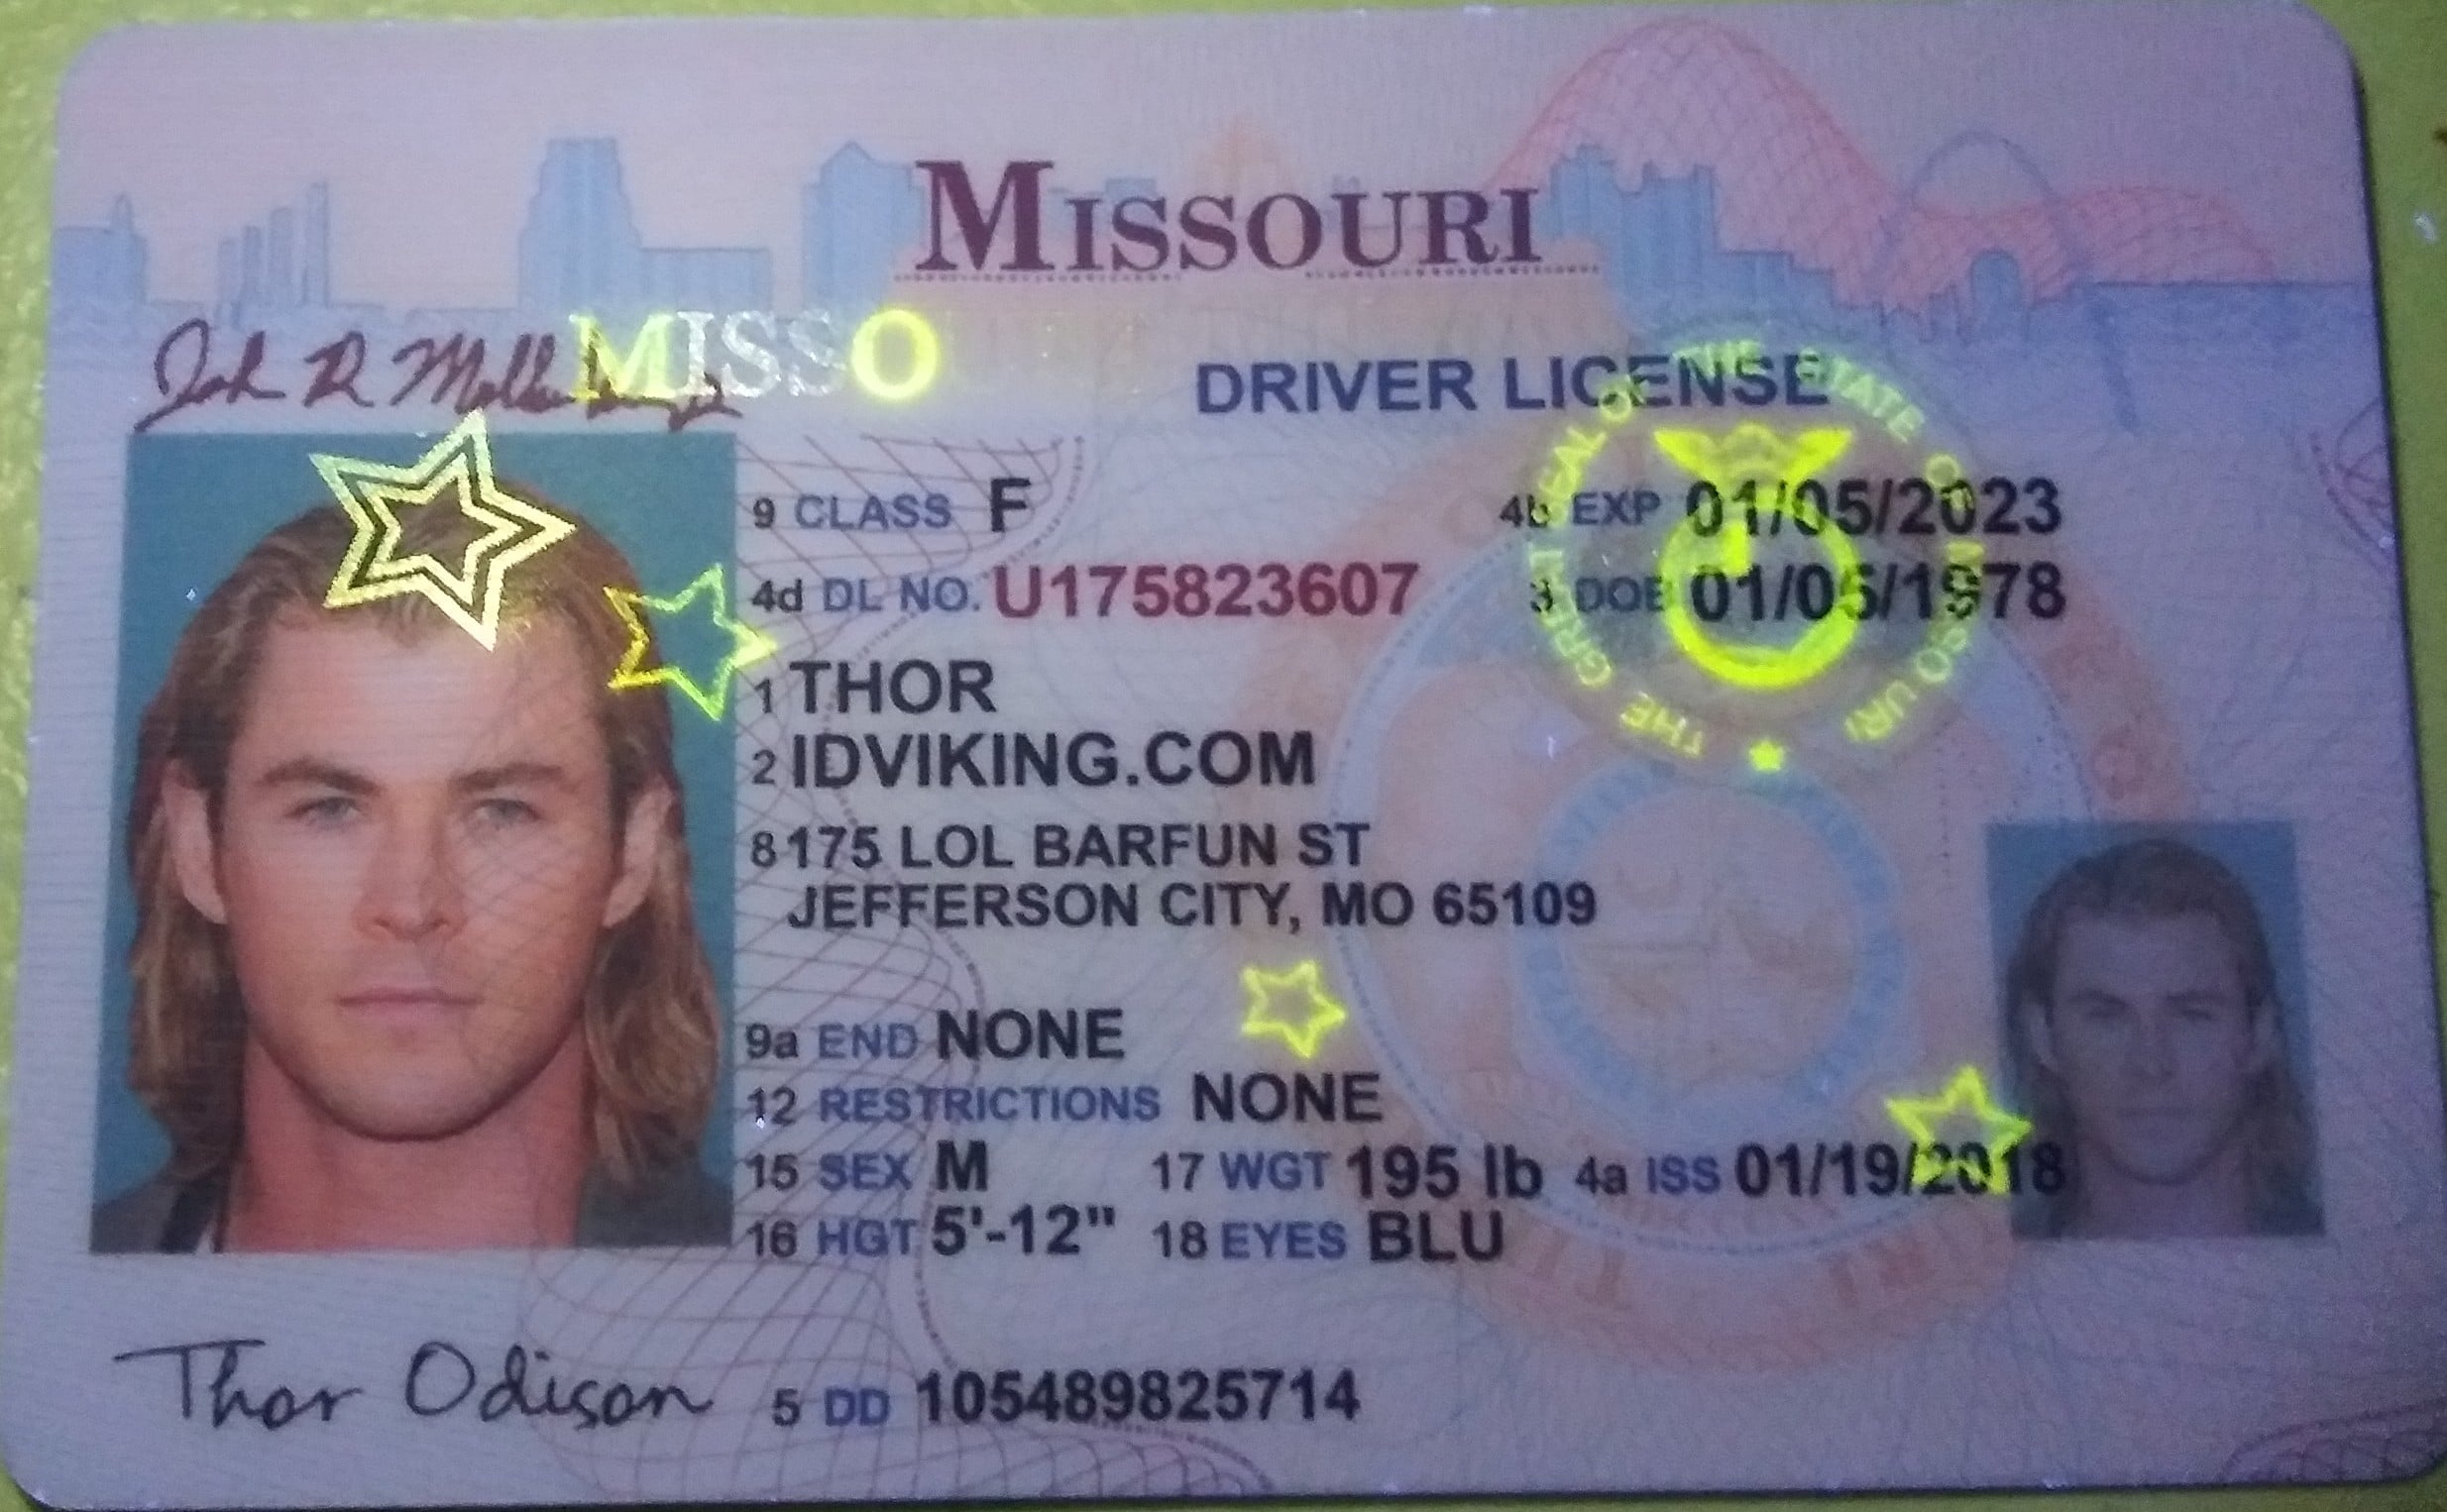 How Much Is A Missouri Fake Id